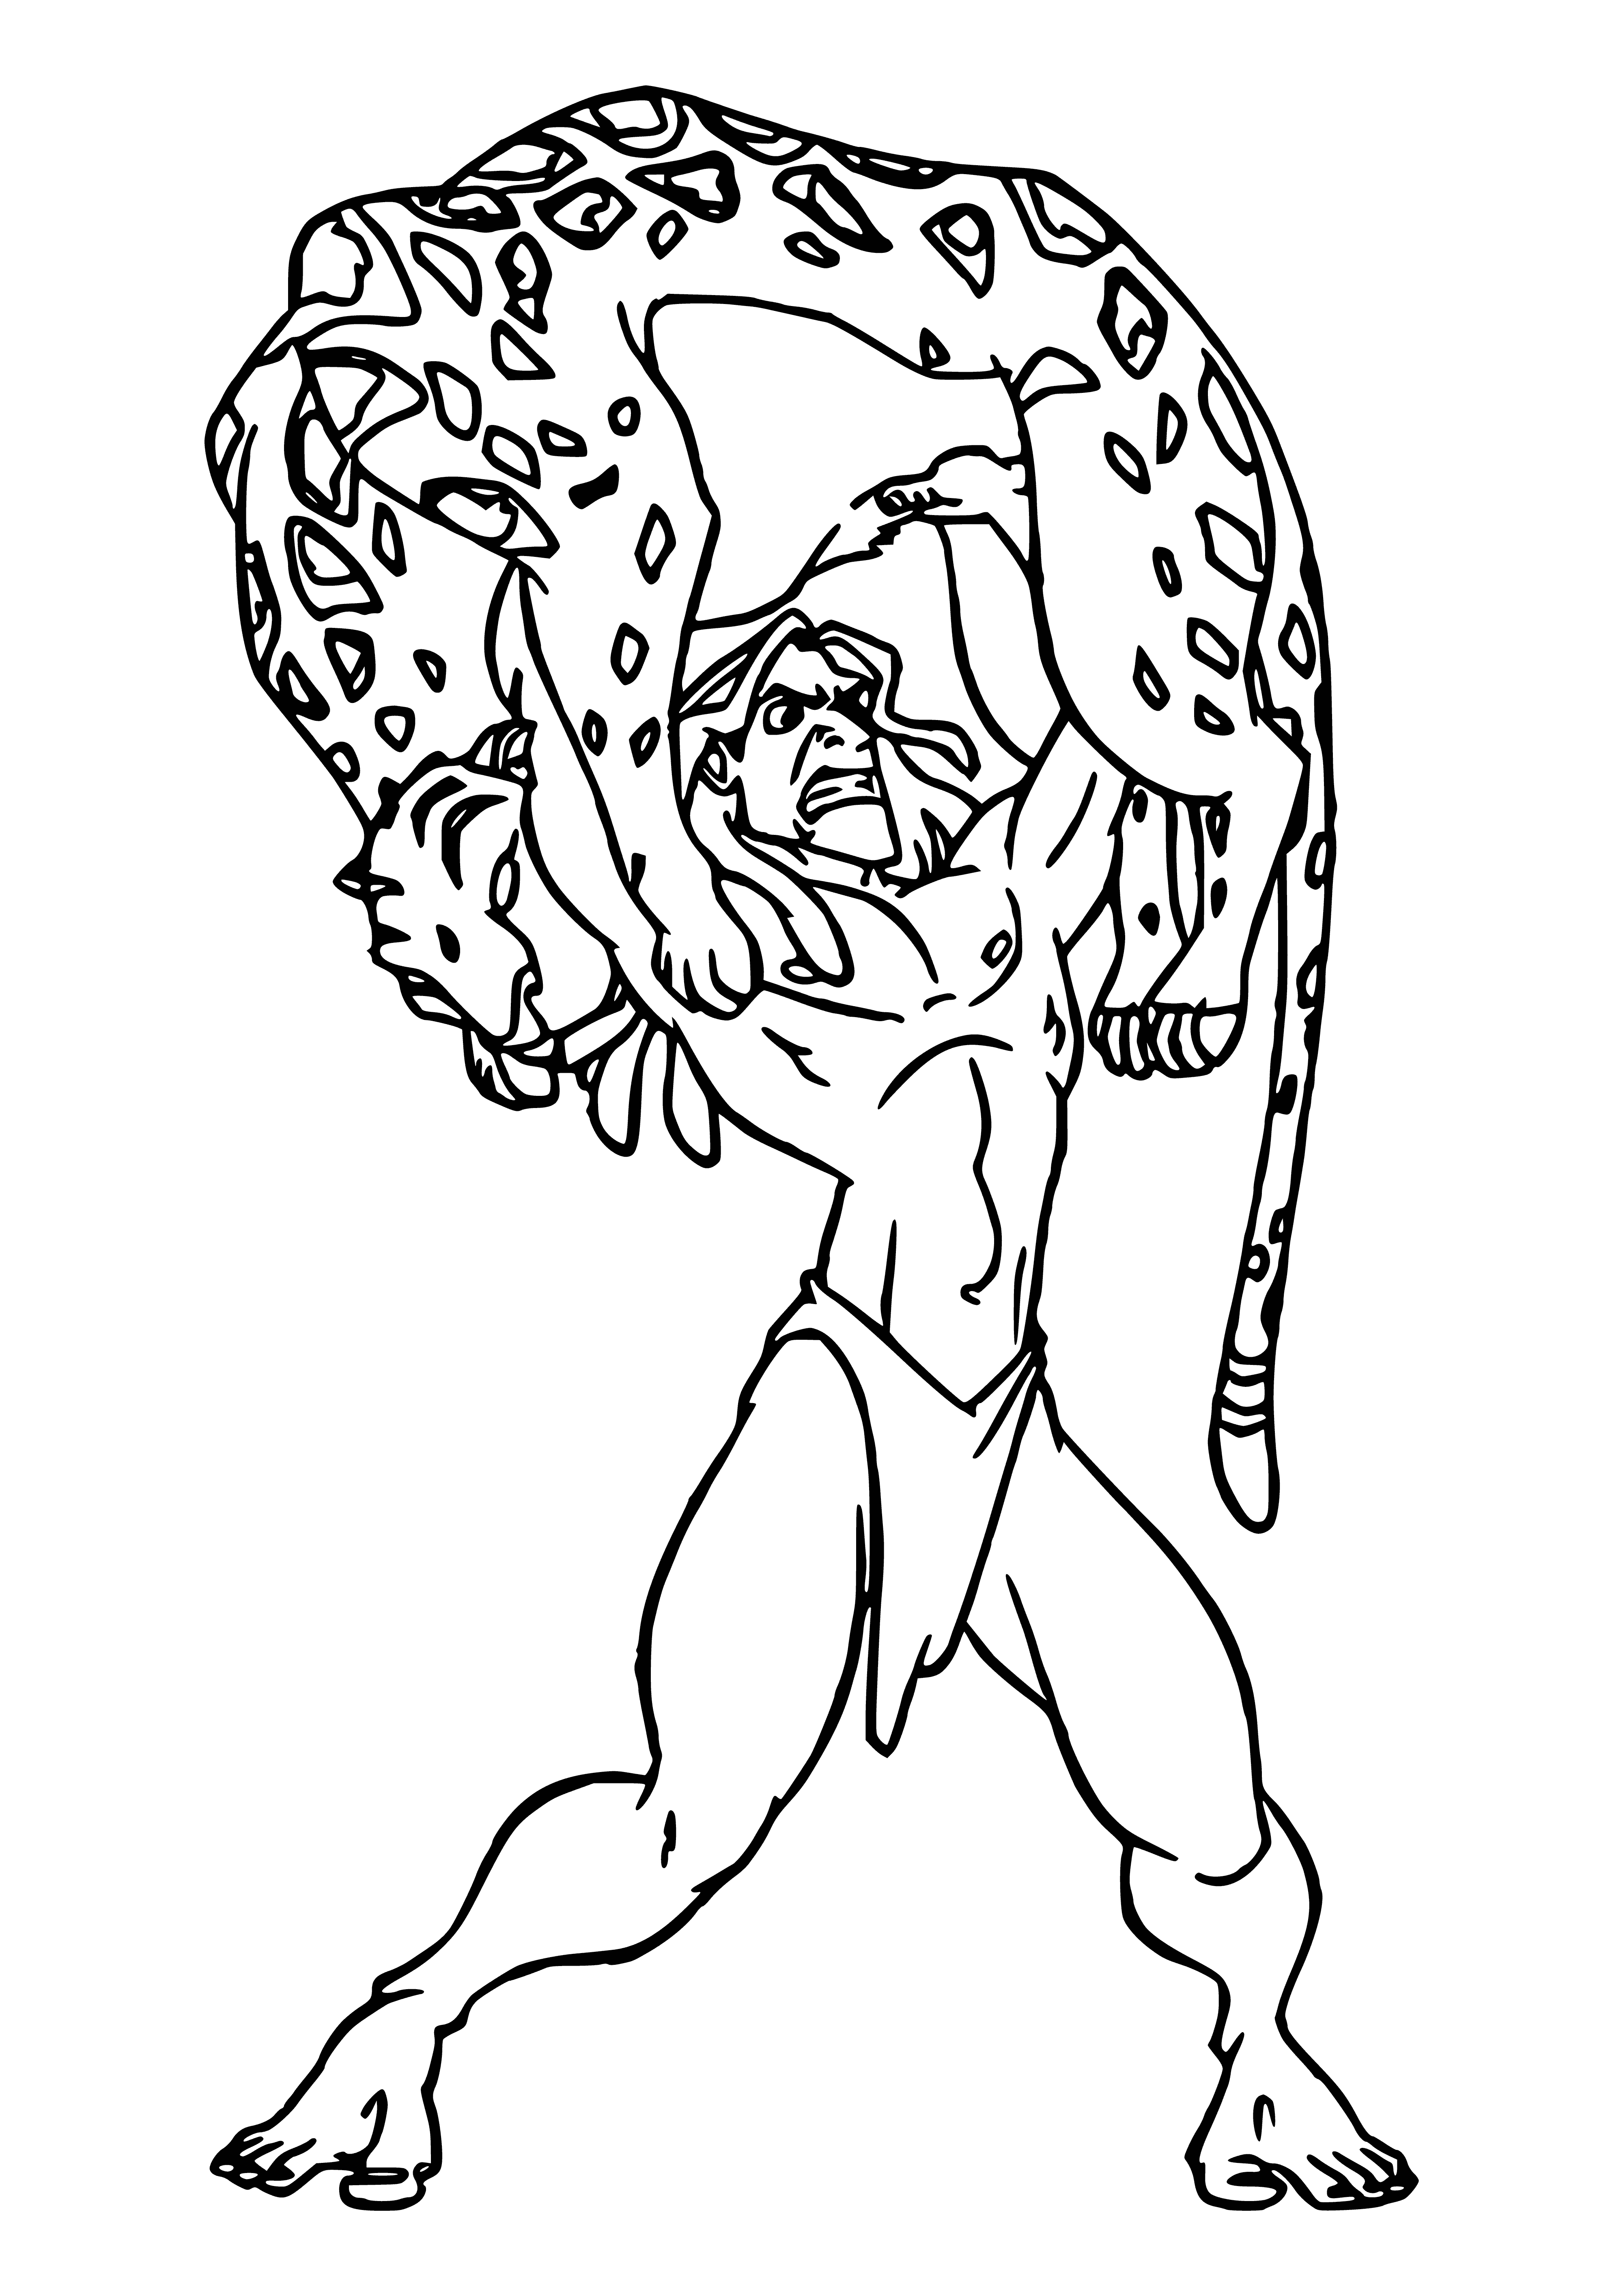 coloring page: A man stands over a dead leopard, wielding a spear and a knife.